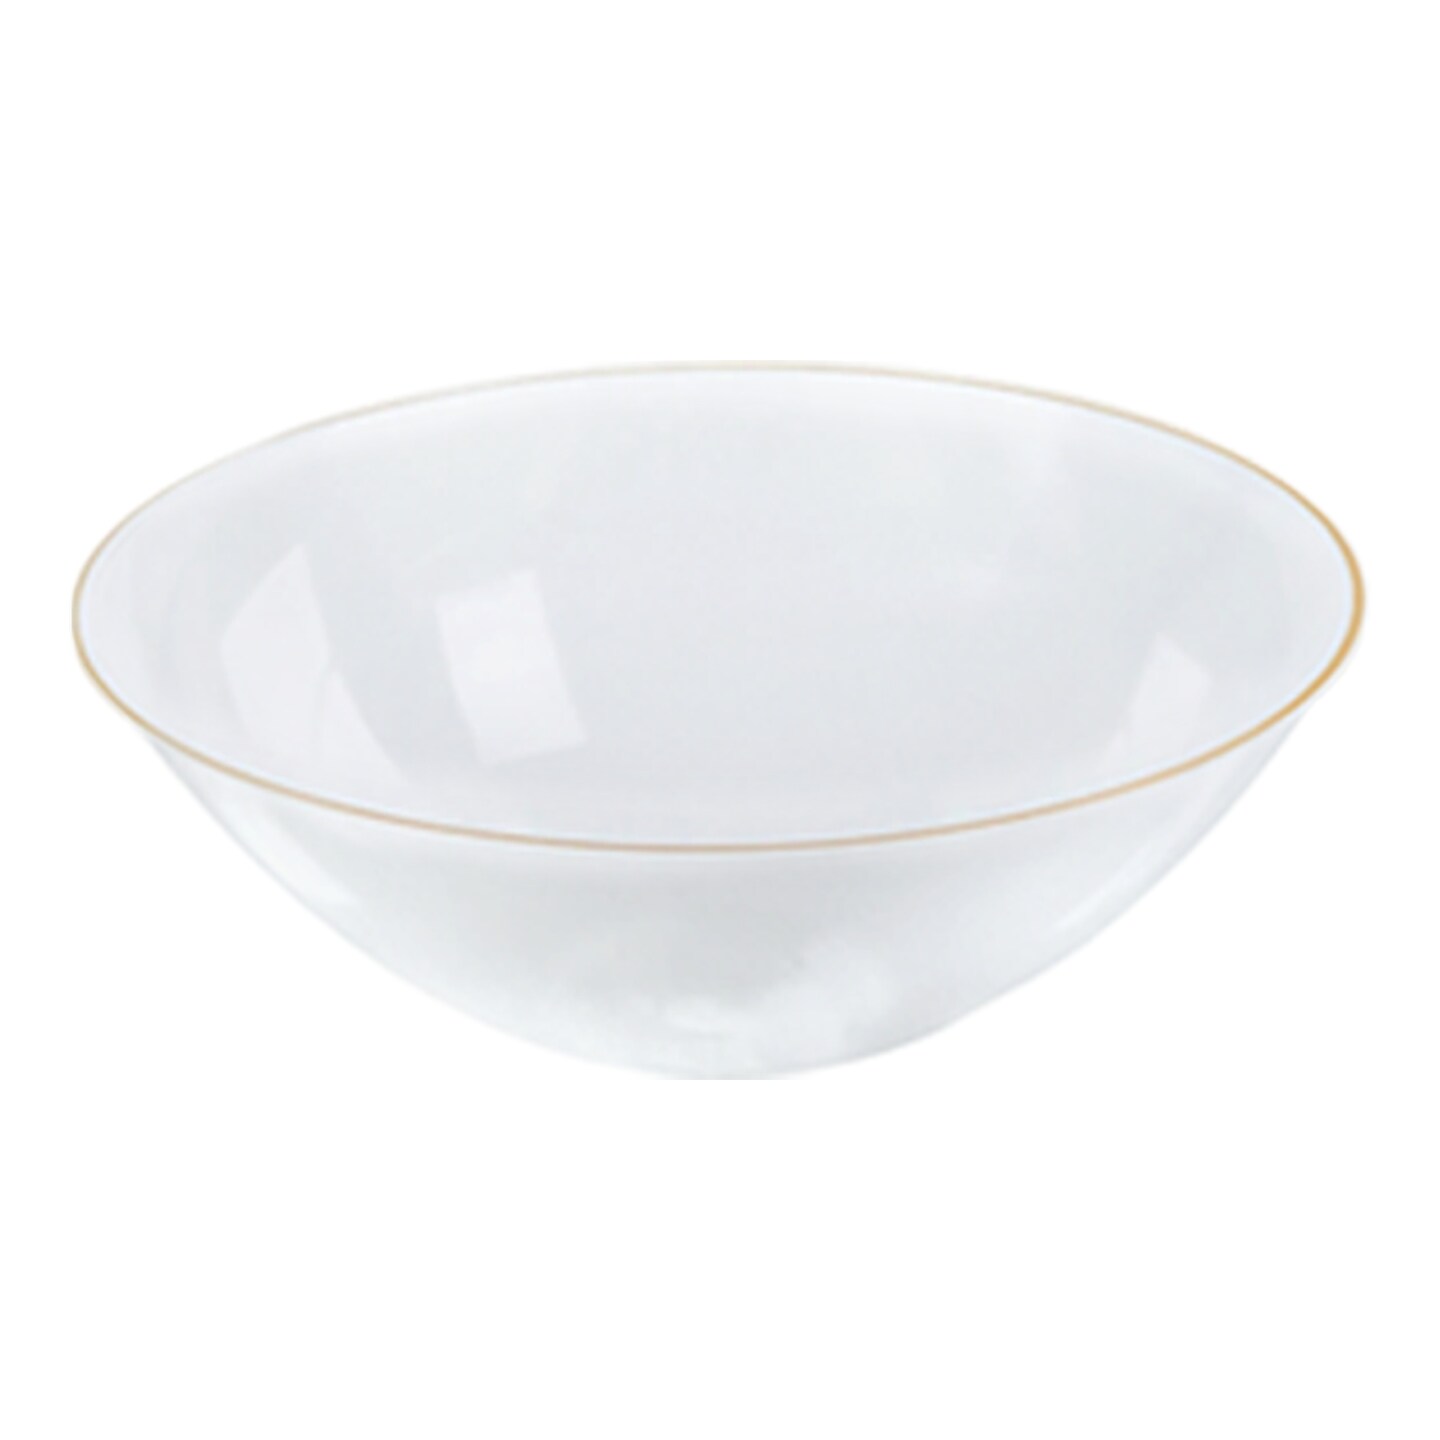 Clear with Gold Rim Organic Round Disposable Plastic Bowls - 32 Ounce (60 Bowls)